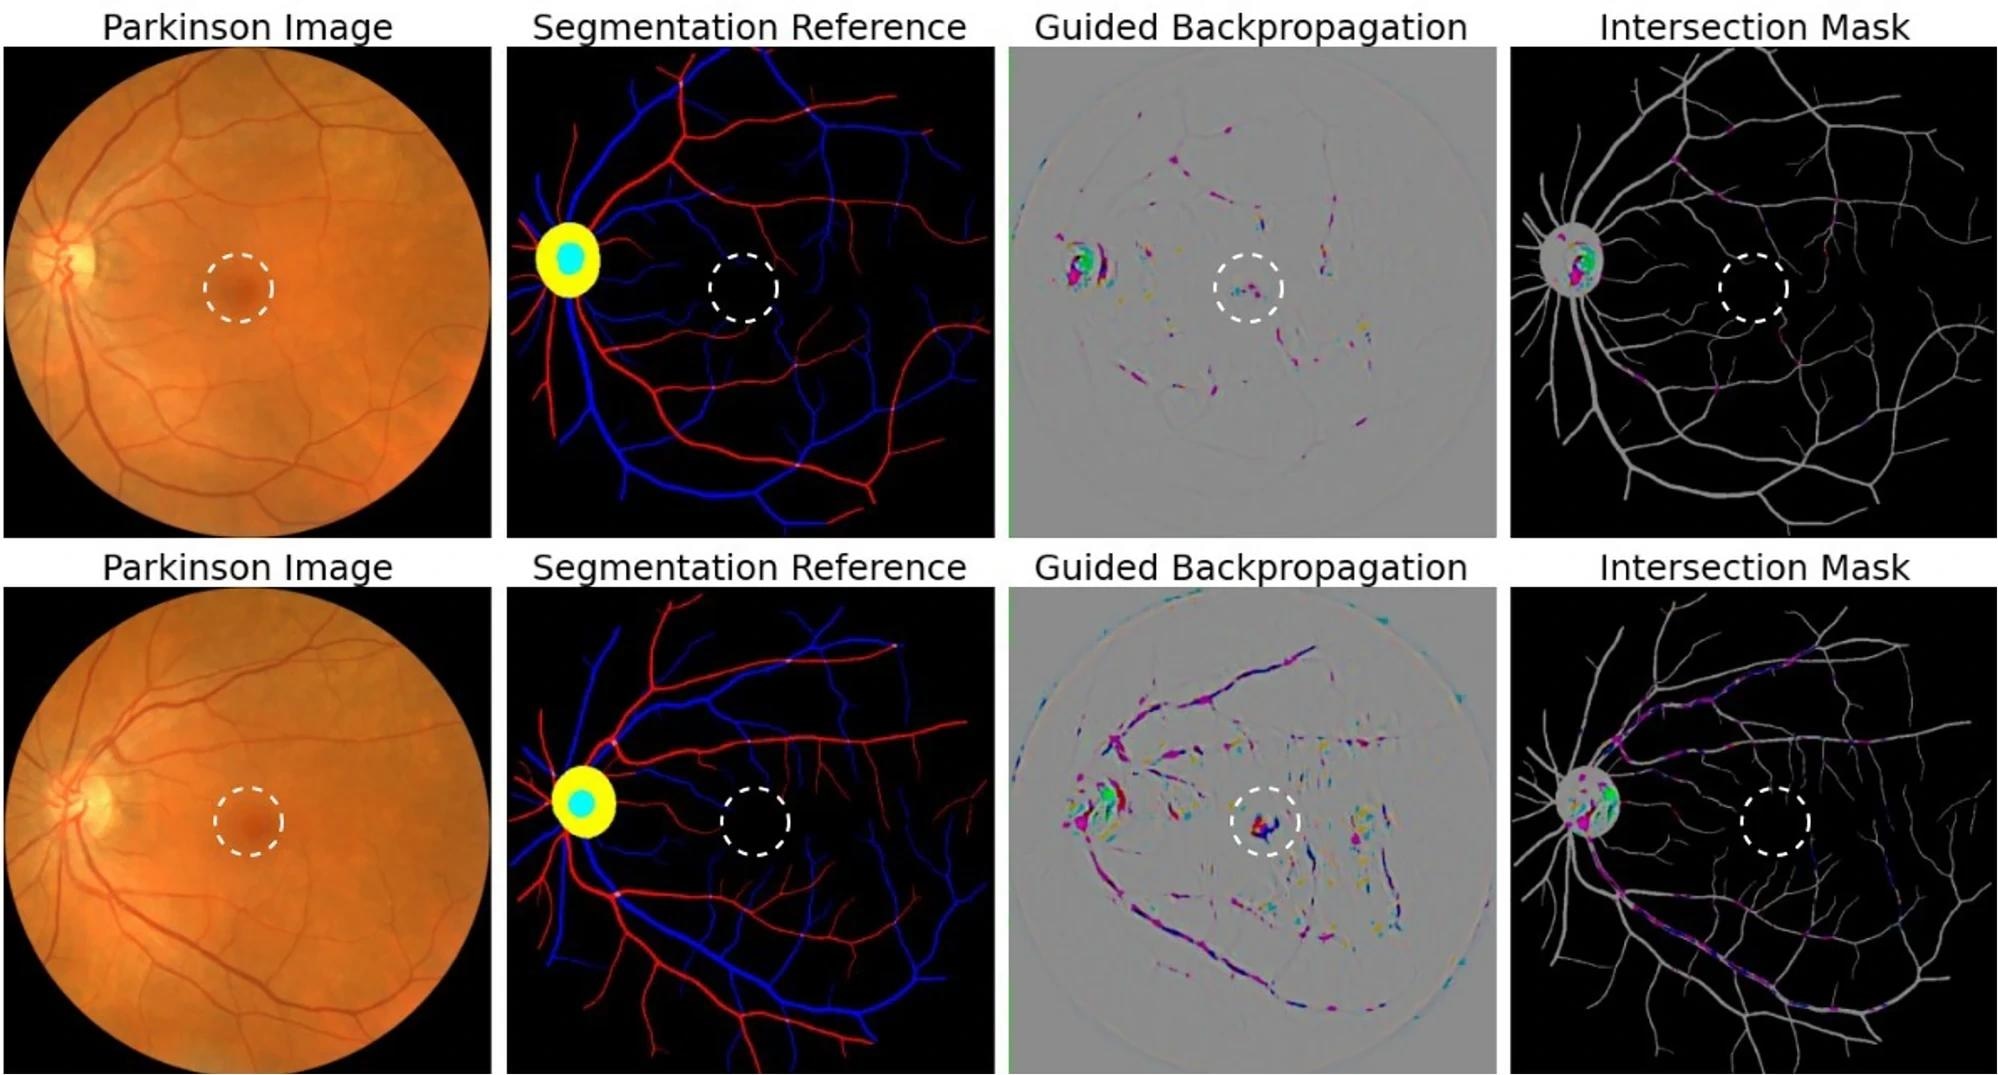 Attribution correspondence of retinal features. In the first column, an artery-vein (red and blue, respectively) map is combined with the optic cup (teal) and optic disc (yellow) generated from the AutoMorph deep learning segmentation module. A white dashed line is shown as an estimate for the foveal region. In the third column, a predicted attribution map is generated using the guided backpropagation algorithm on top of the AlexNet model. The intersection of the salient features with the segmentation is shown in the last column. The images represent the left (top) and right (bottom) eyes from the same subject, demonstrating distinct feature distributions for prediction.